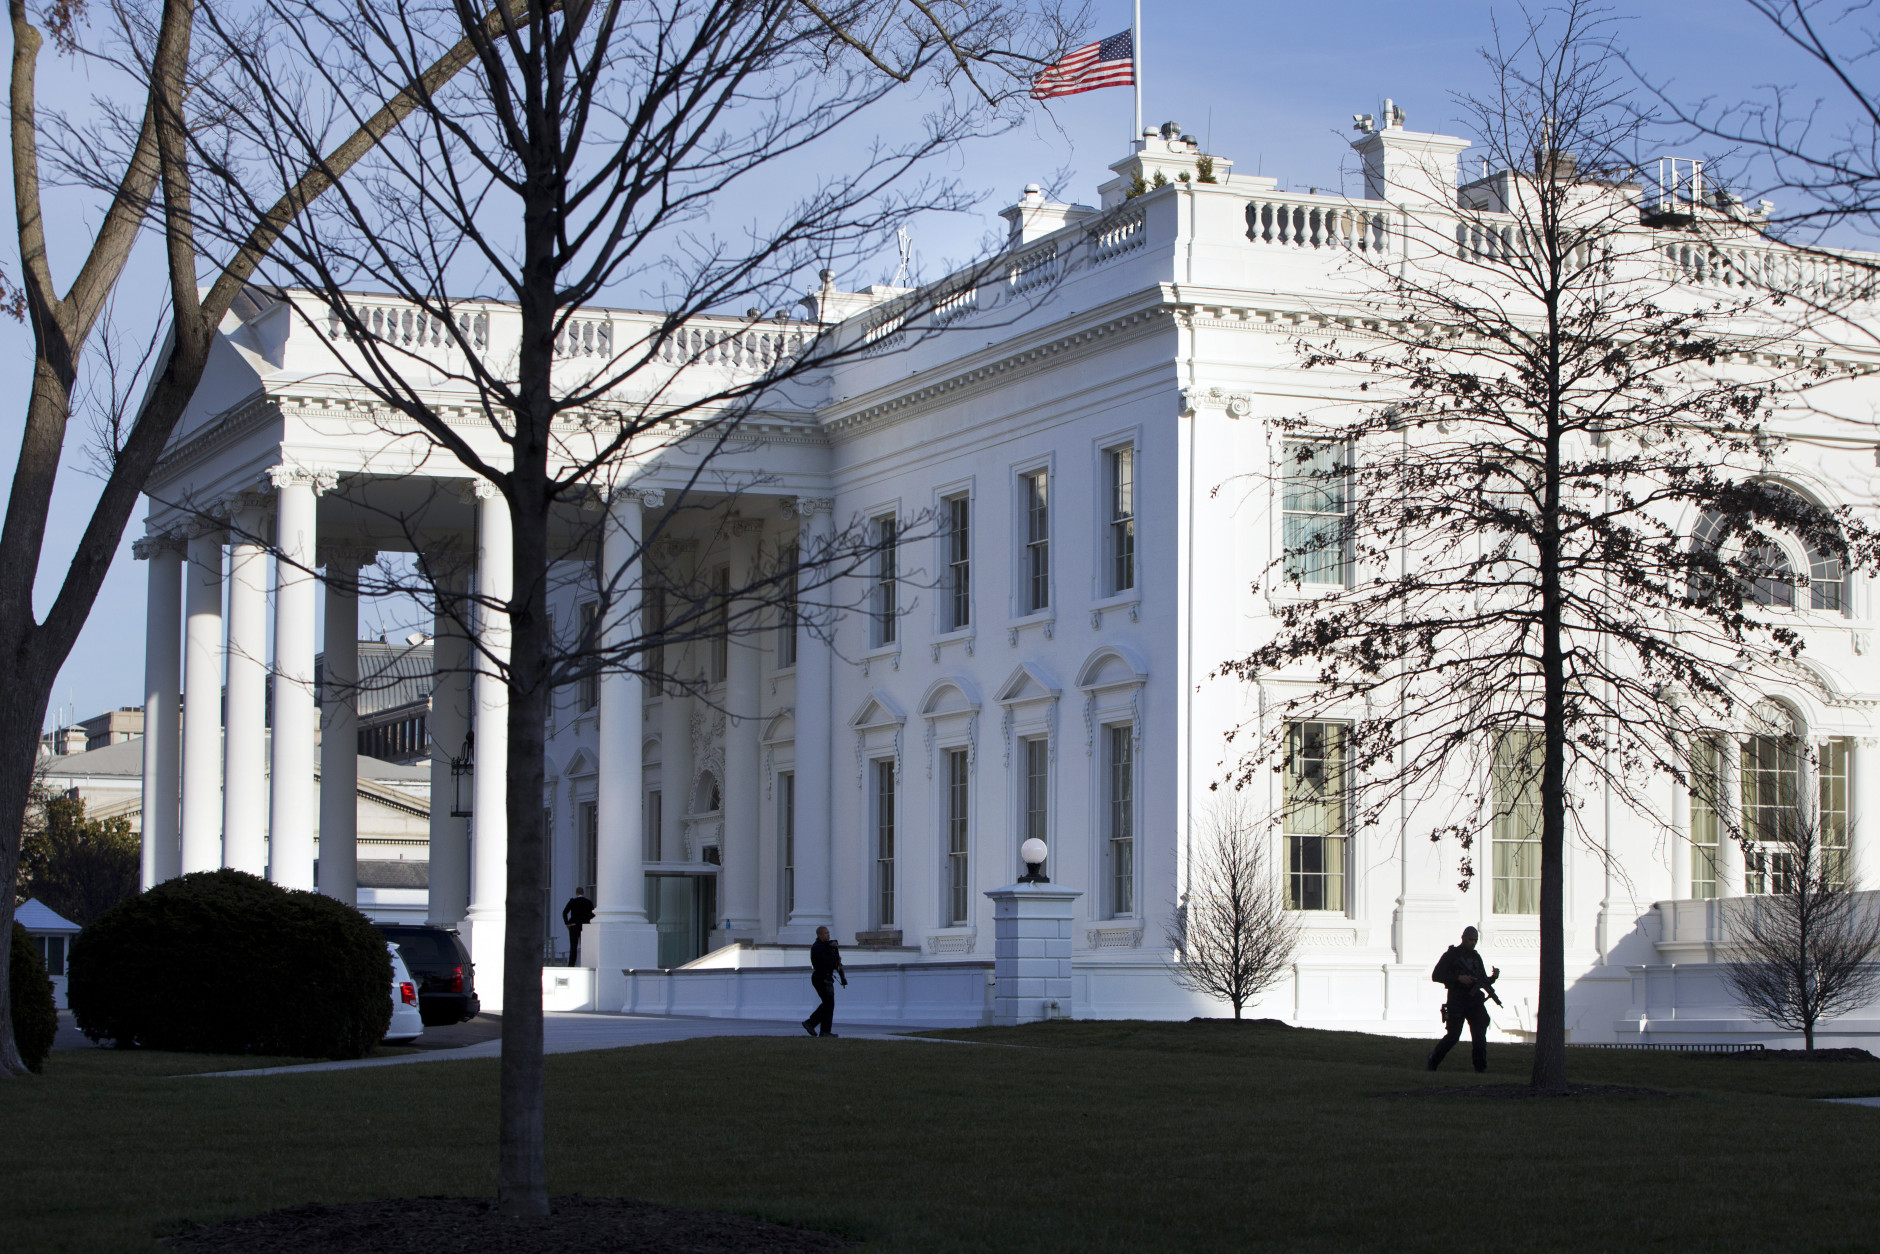 Uniformed Secret Service police officers are silhouetted by the White House as they patrol the North Lawn of the White House after a lock down was lifted at the White House in Washington, Monday, March 7, 2016. (AP Photo/Jacquelyn Martin)